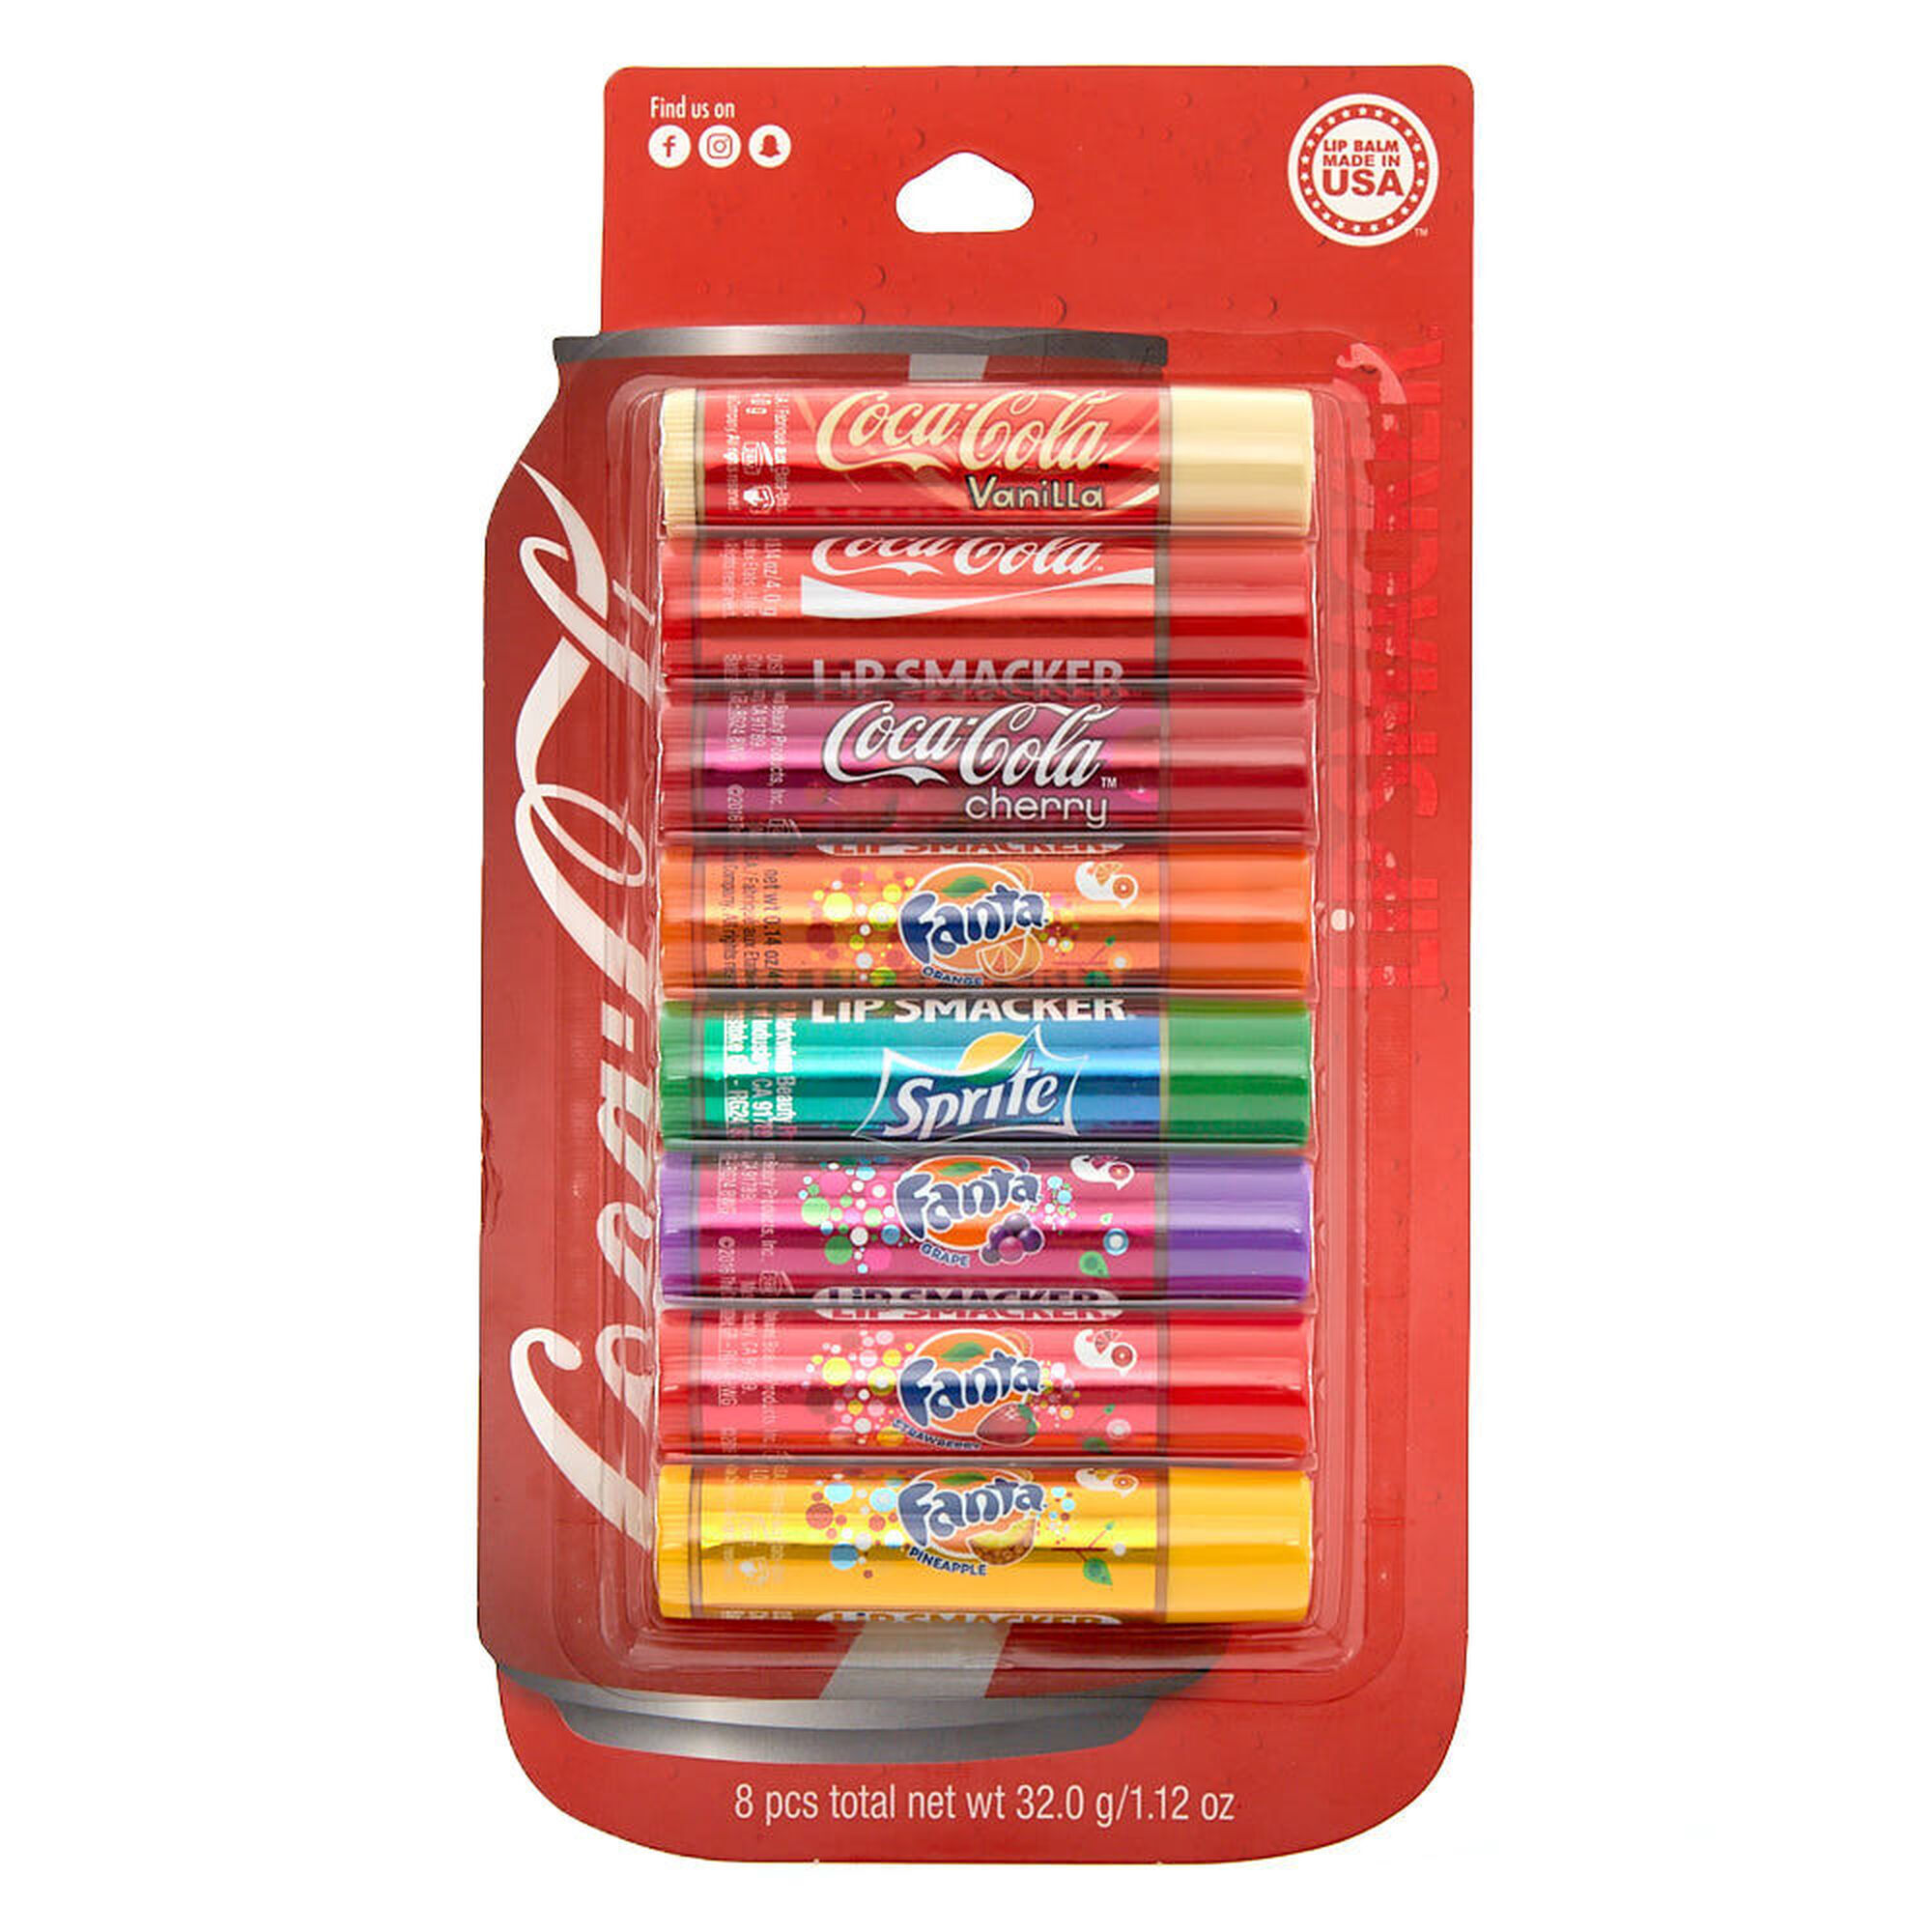 View Claires Lip Smacker CocaCola Drinks Balm Set 8 Pack information